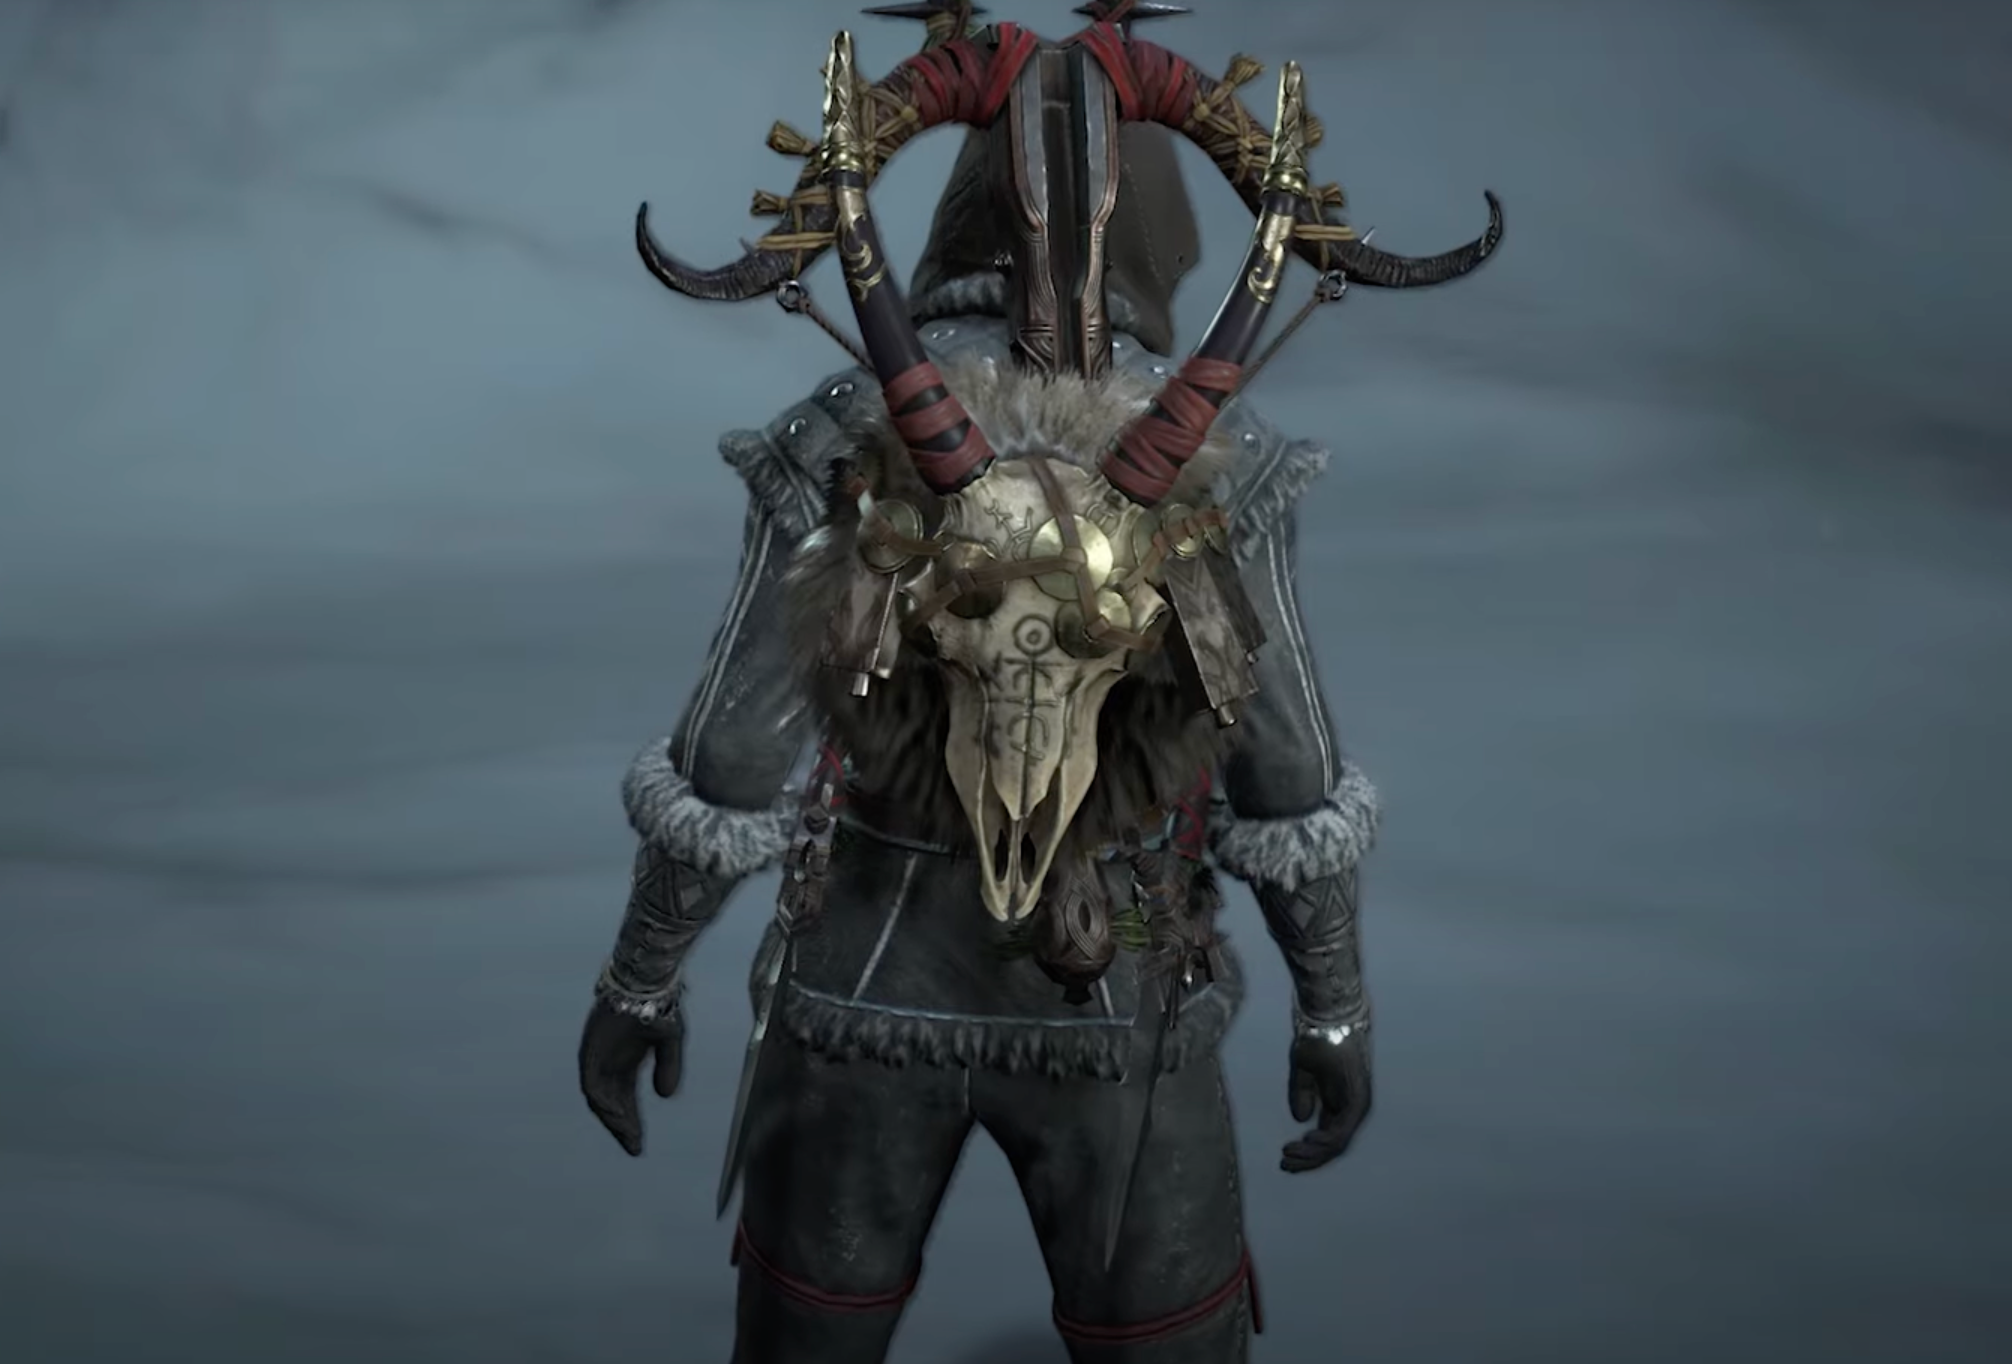 Cosmetic Backpieces from the Midwinter Blight holiday event